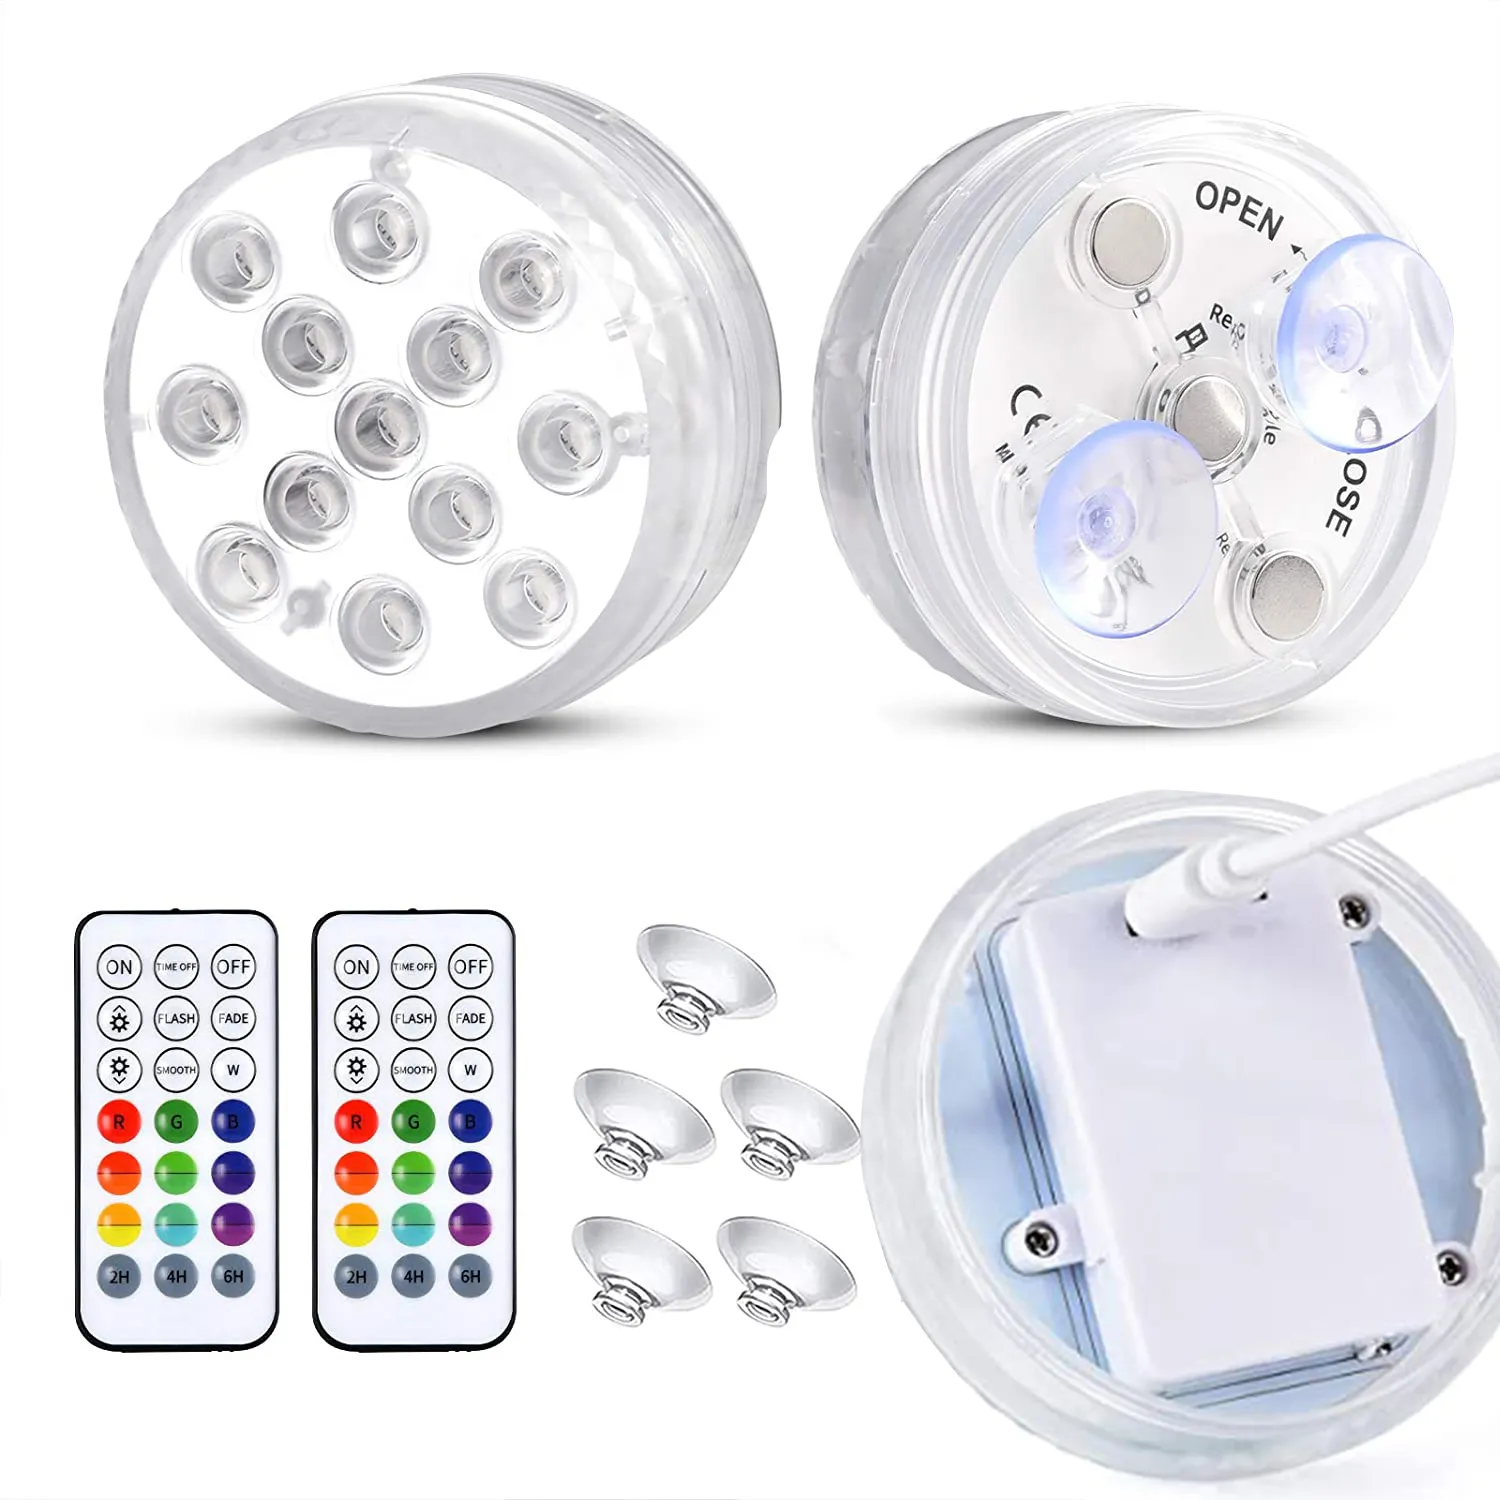 Remote Control battery operated USB rechargeable under water submersible Swimming Pool RGB led color changing pool Lights bulb